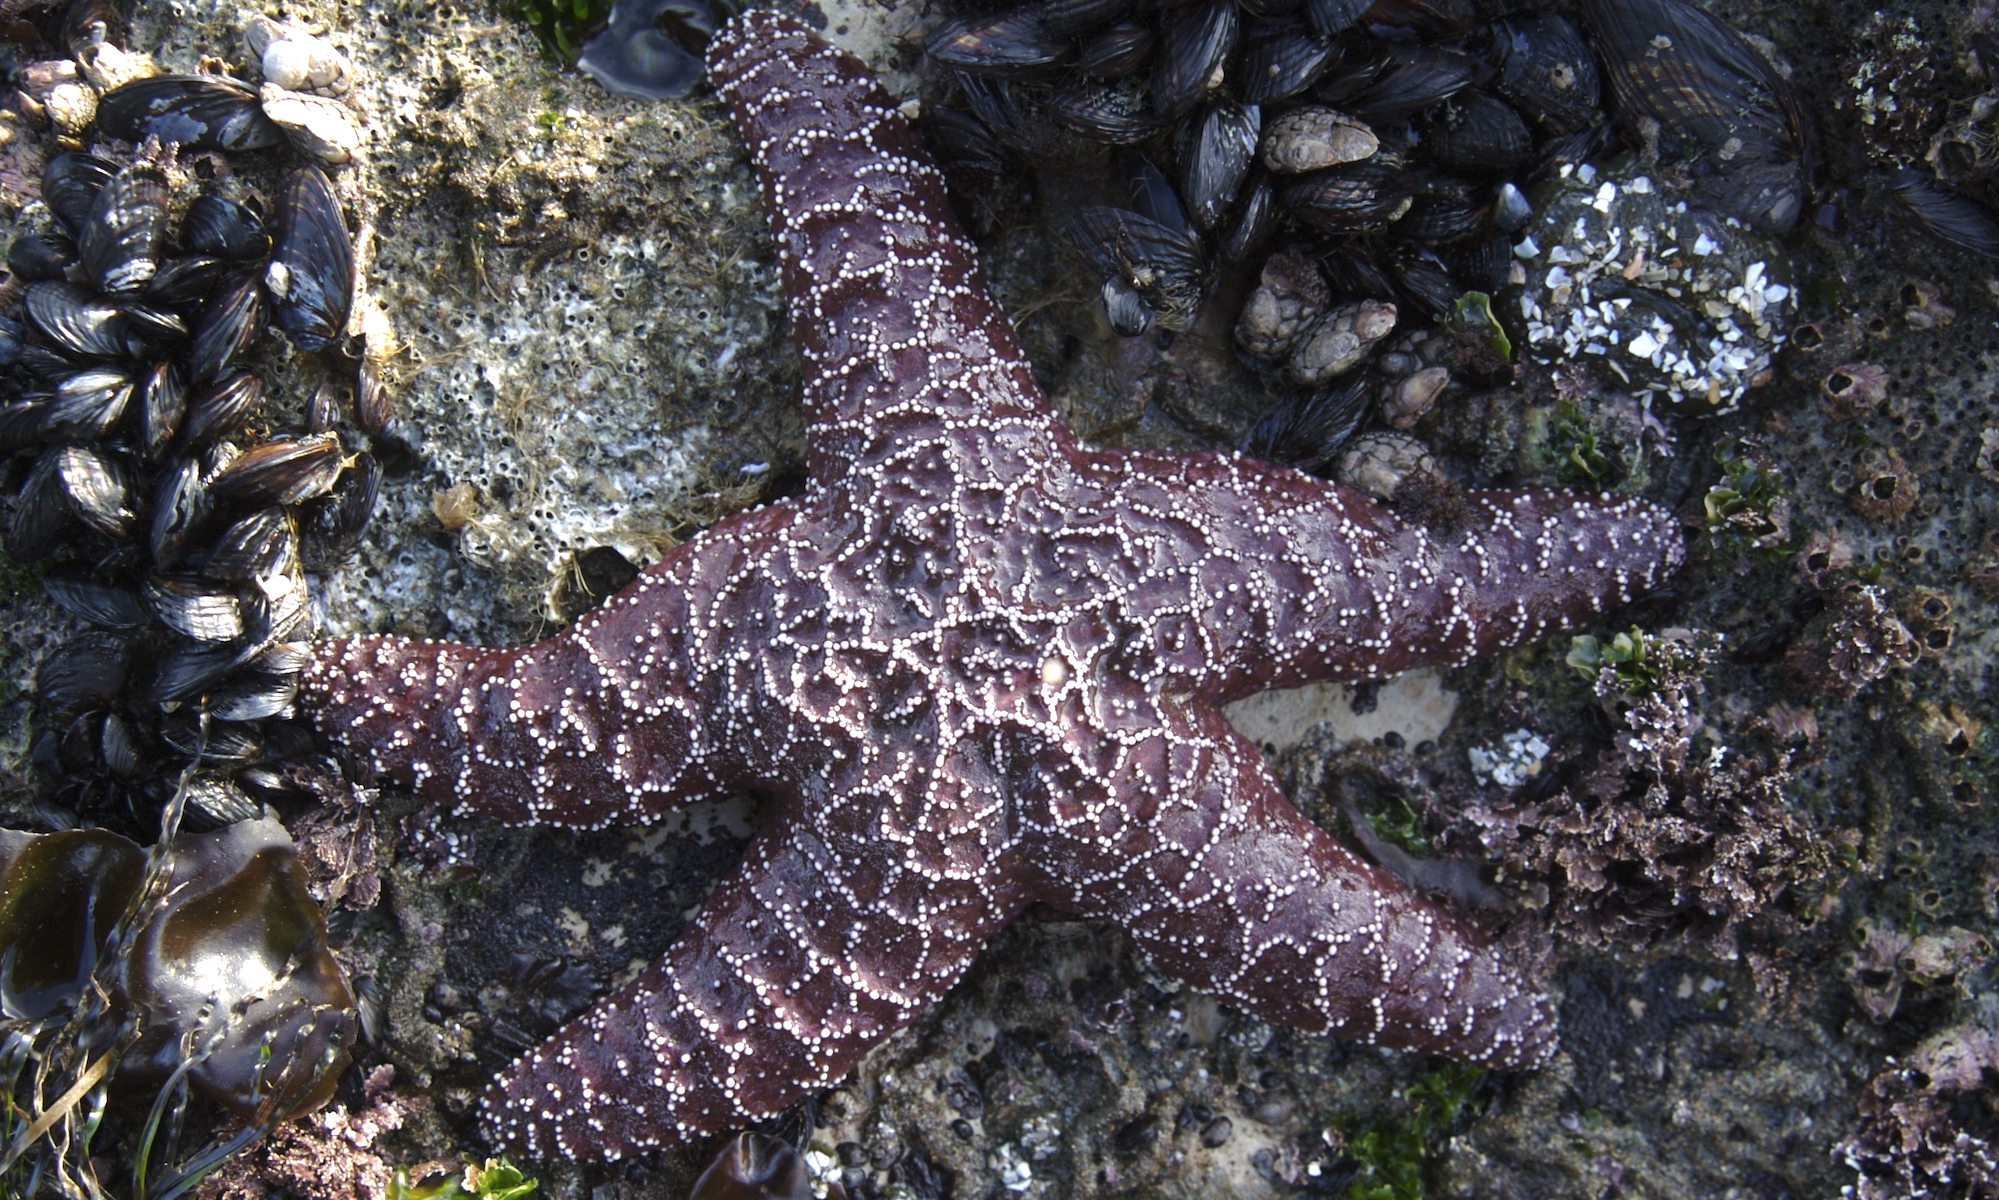 A purple sea star attached to a rock covered with mussels and seaweed.